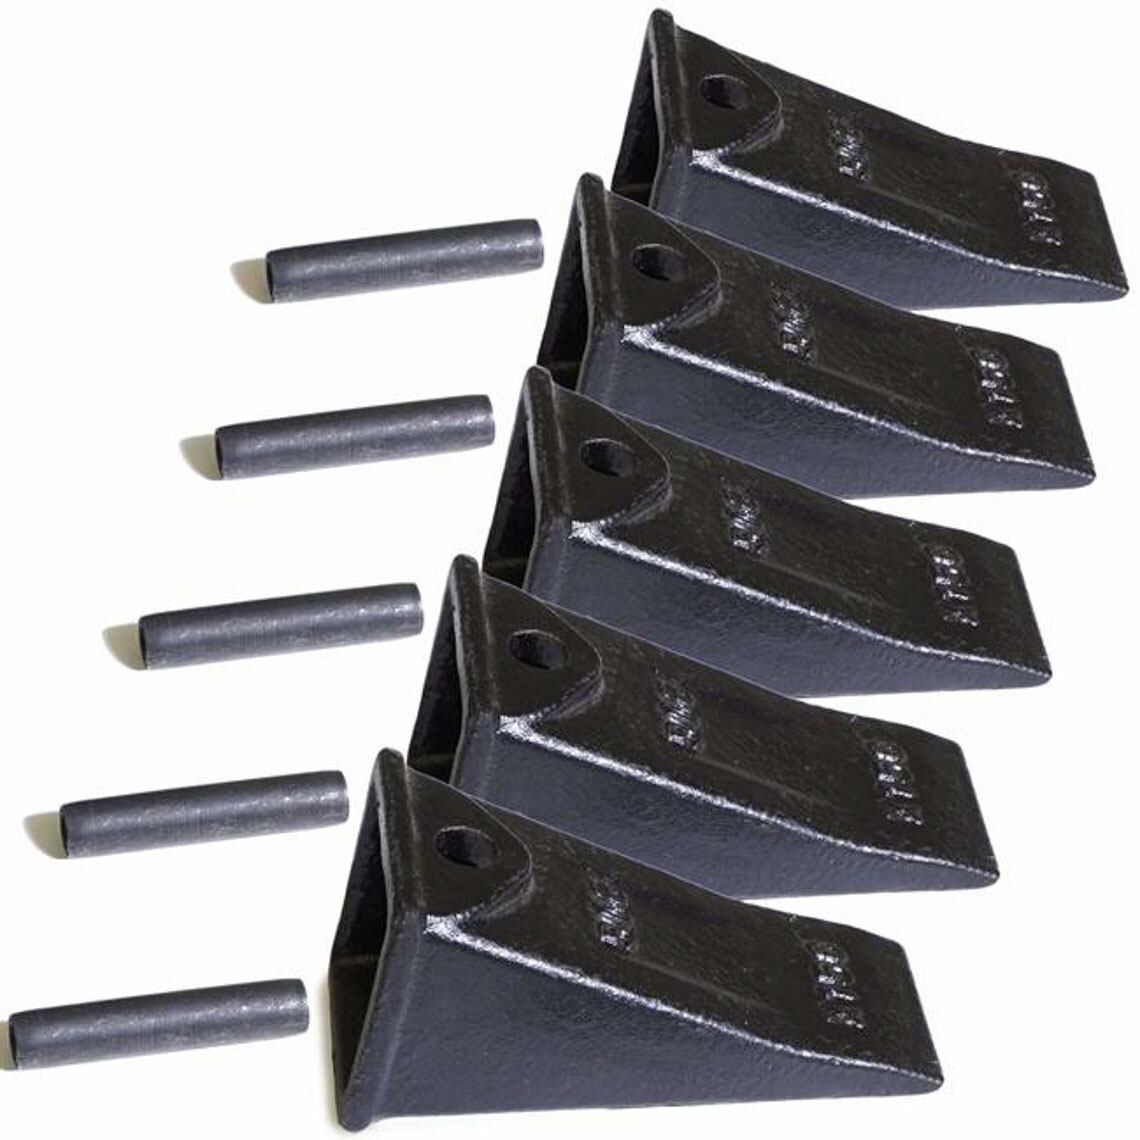 Set of 10 Skid-steer Buckets P156 Hensley Style Pin for Backhoe 